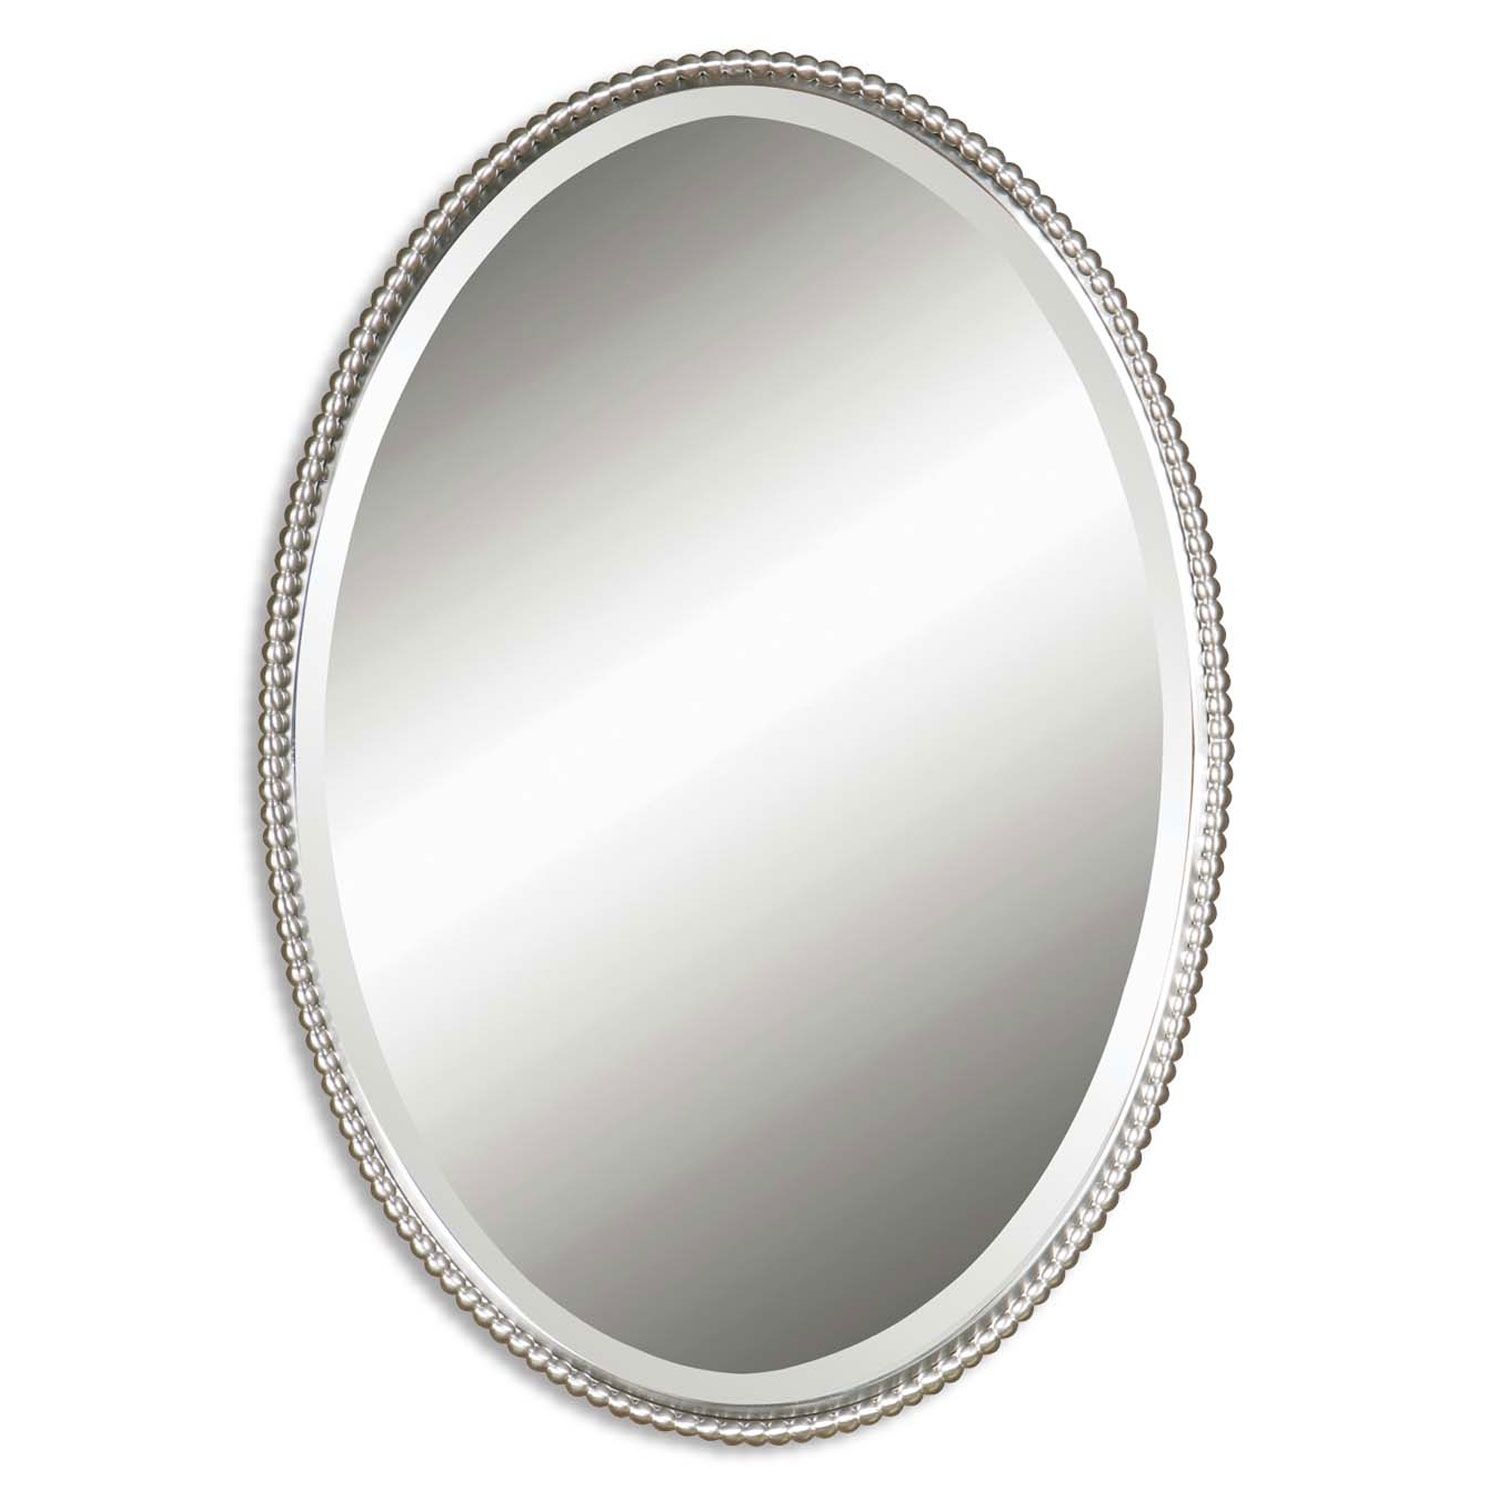 Oval Wall Mirrors 270 Kitchen Bathroom Frameless Vanity Options In Oval White Mirror (View 12 of 15)